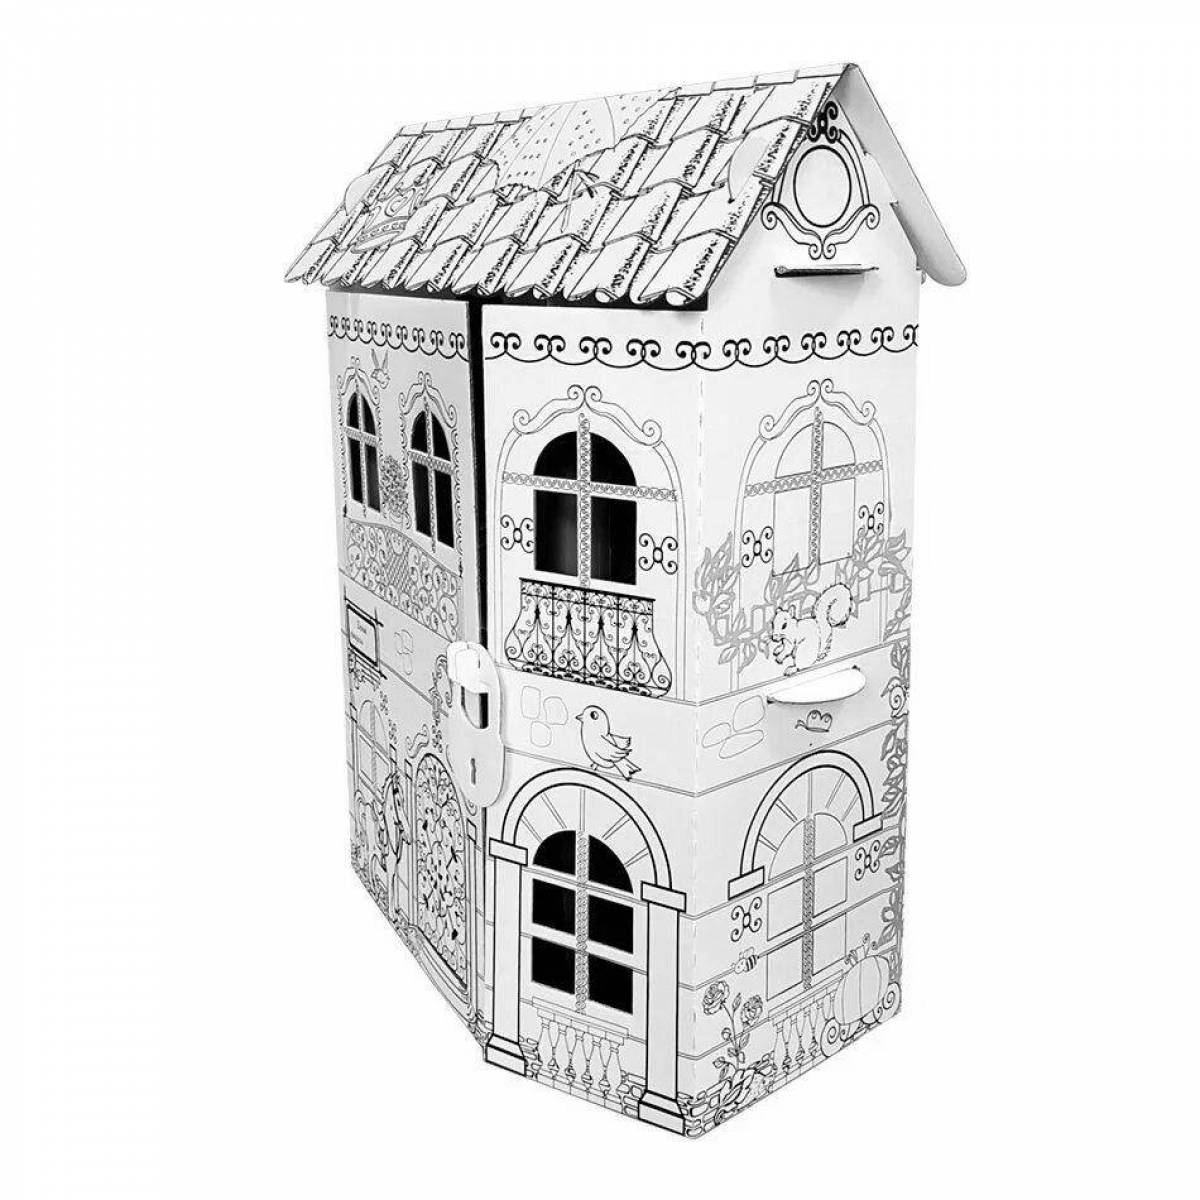 Coloring book big cardboard house for kids and teens